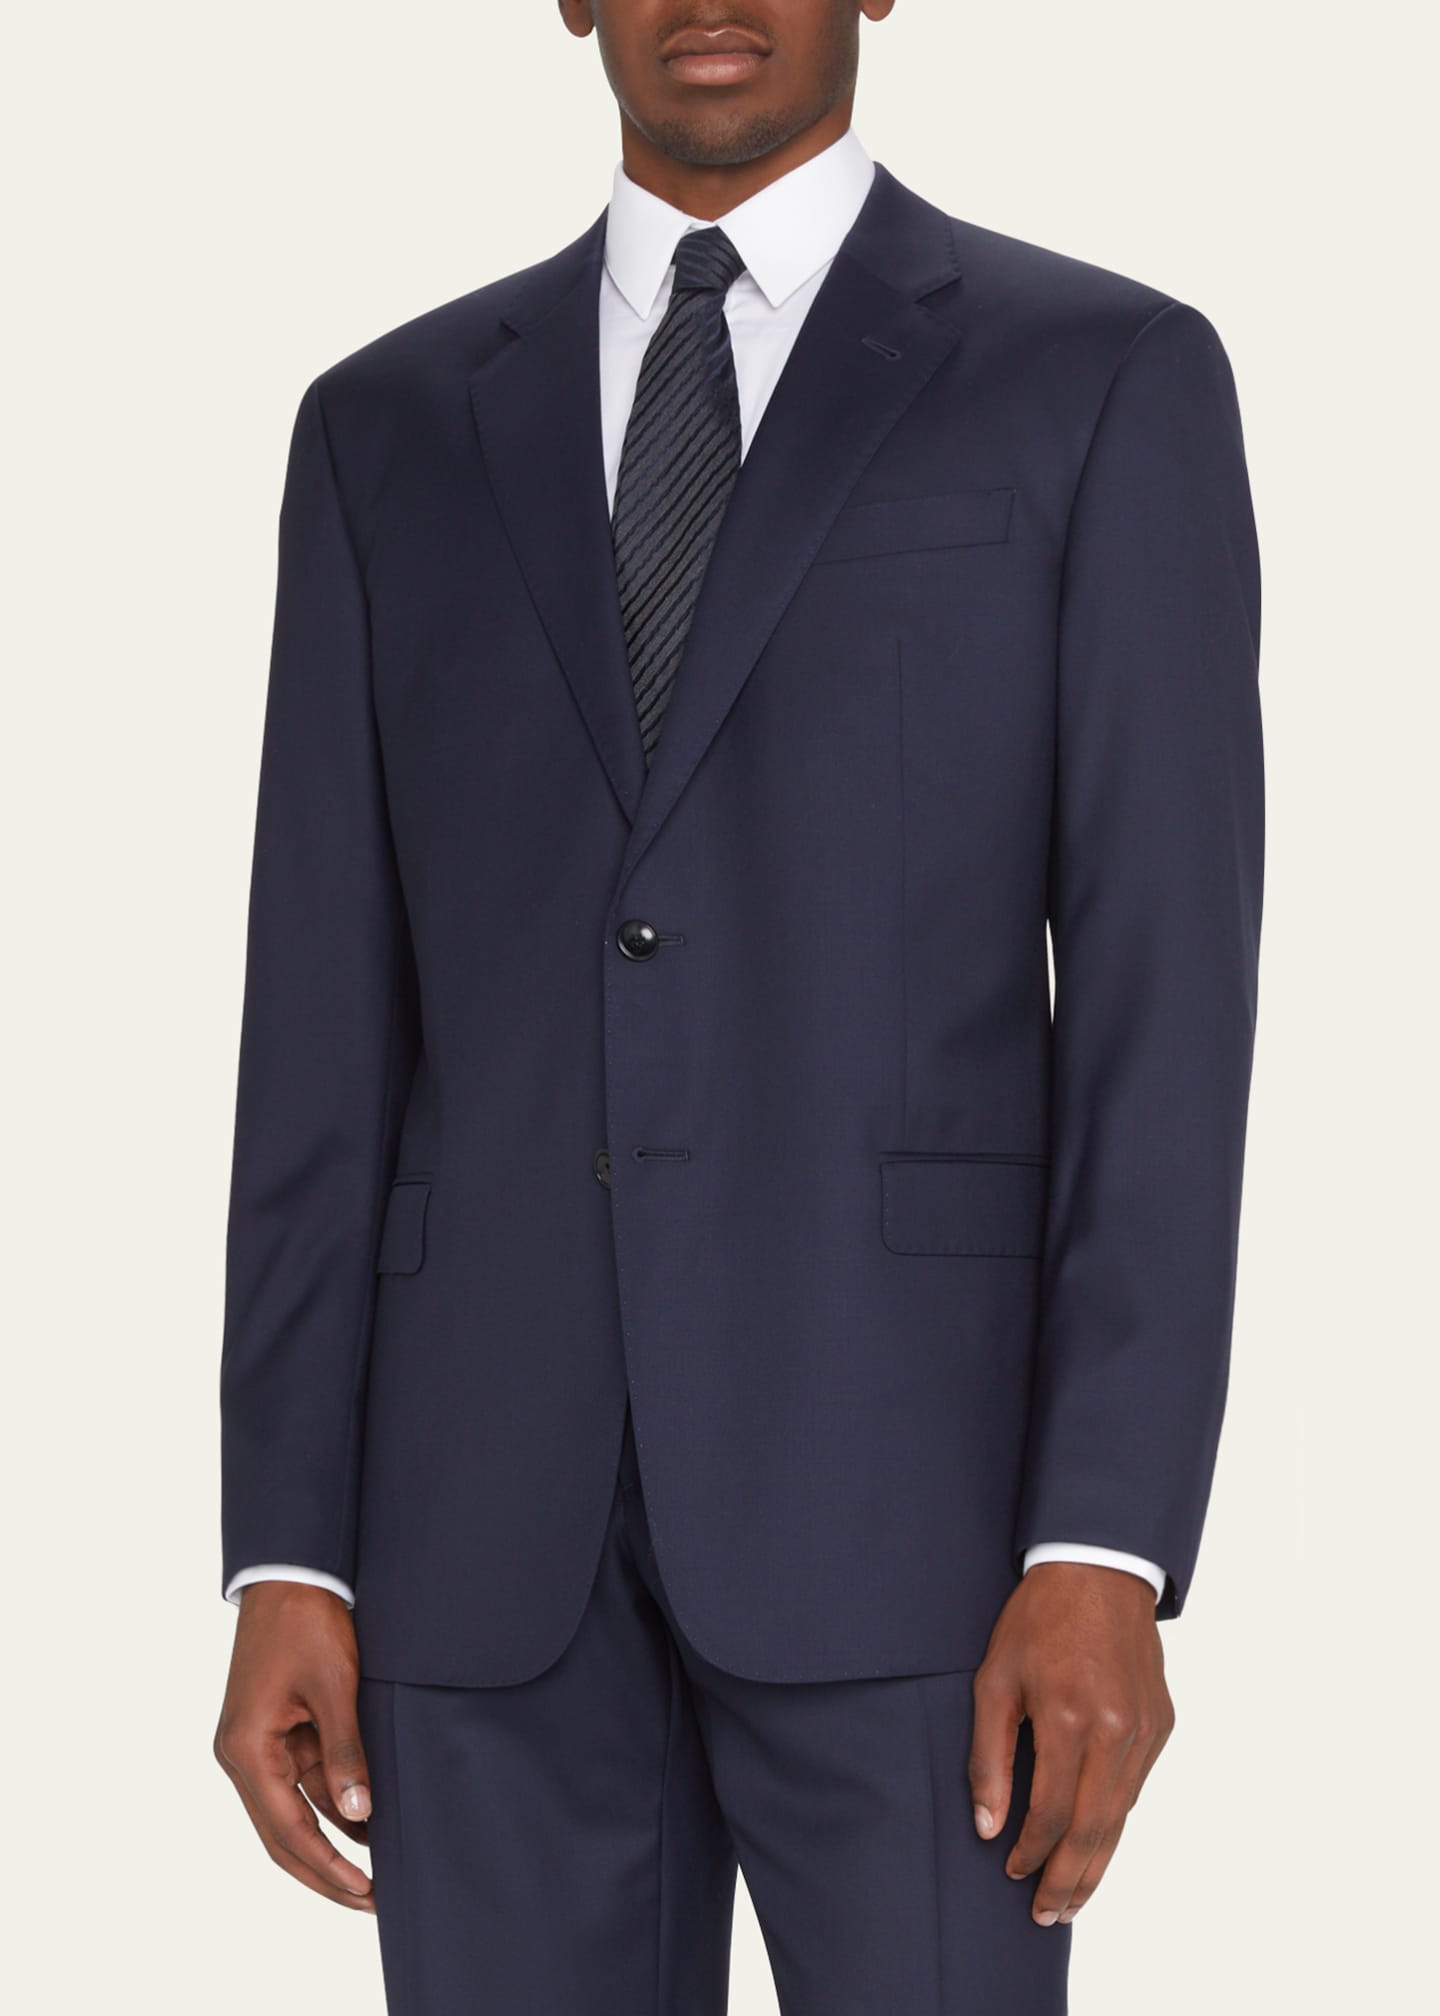 Produktionscenter bungee jump Afstemning Giorgio Armani Two-Button Soft Basic Suit, Navy - Bergdorf Goodman